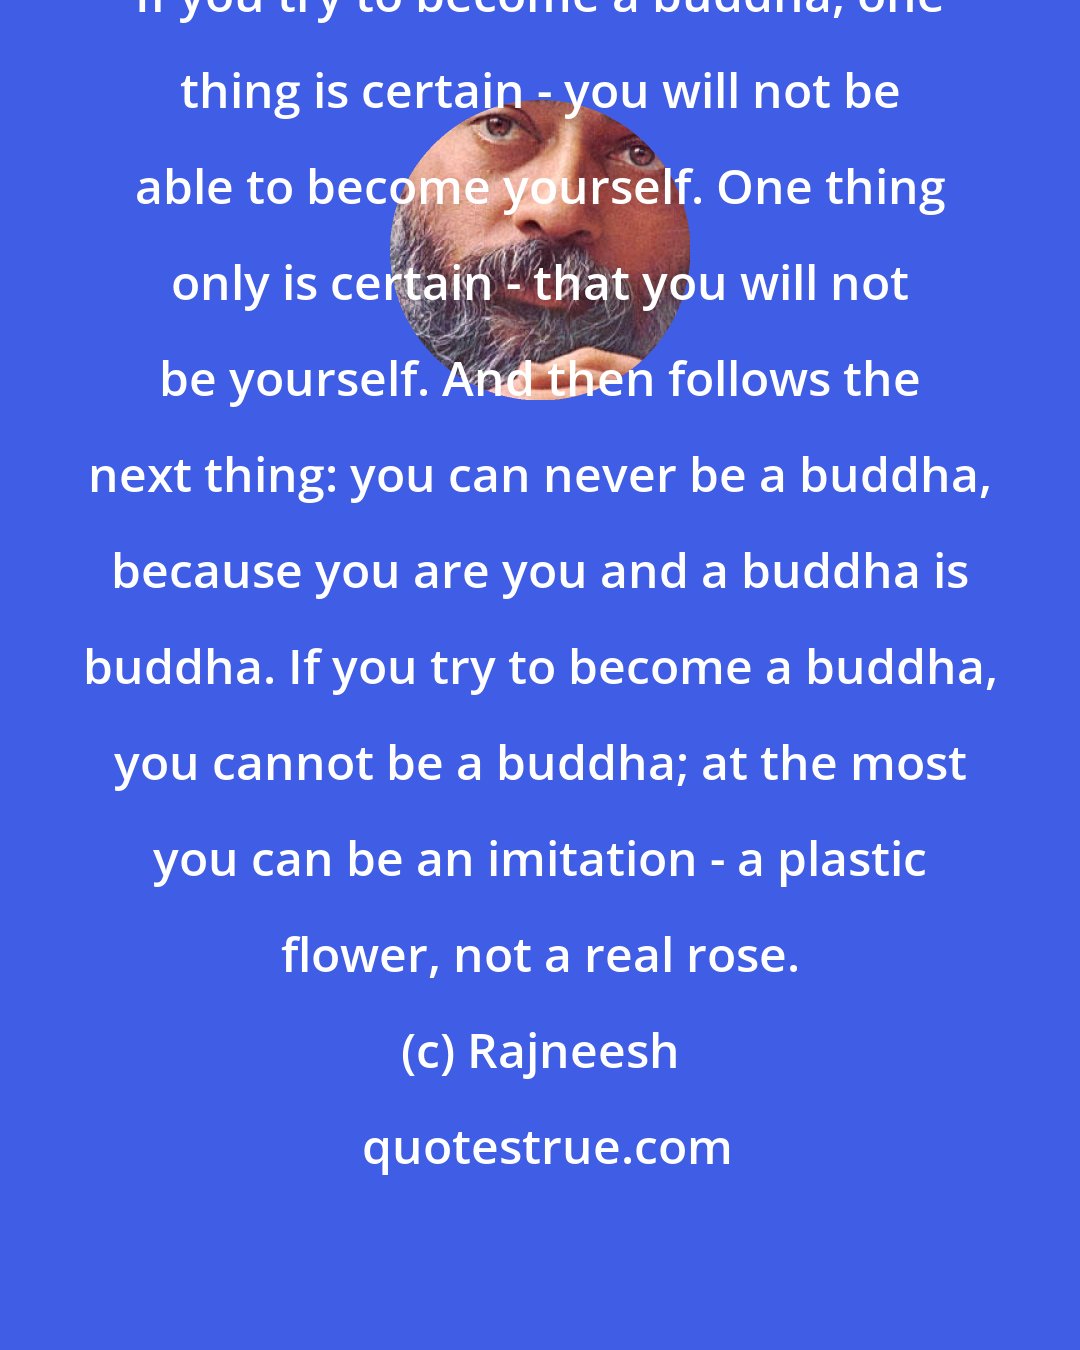 Rajneesh: If you try to become a buddha, one thing is certain - you will not be able to become yourself. One thing only is certain - that you will not be yourself. And then follows the next thing: you can never be a buddha, because you are you and a buddha is buddha. If you try to become a buddha, you cannot be a buddha; at the most you can be an imitation - a plastic flower, not a real rose.